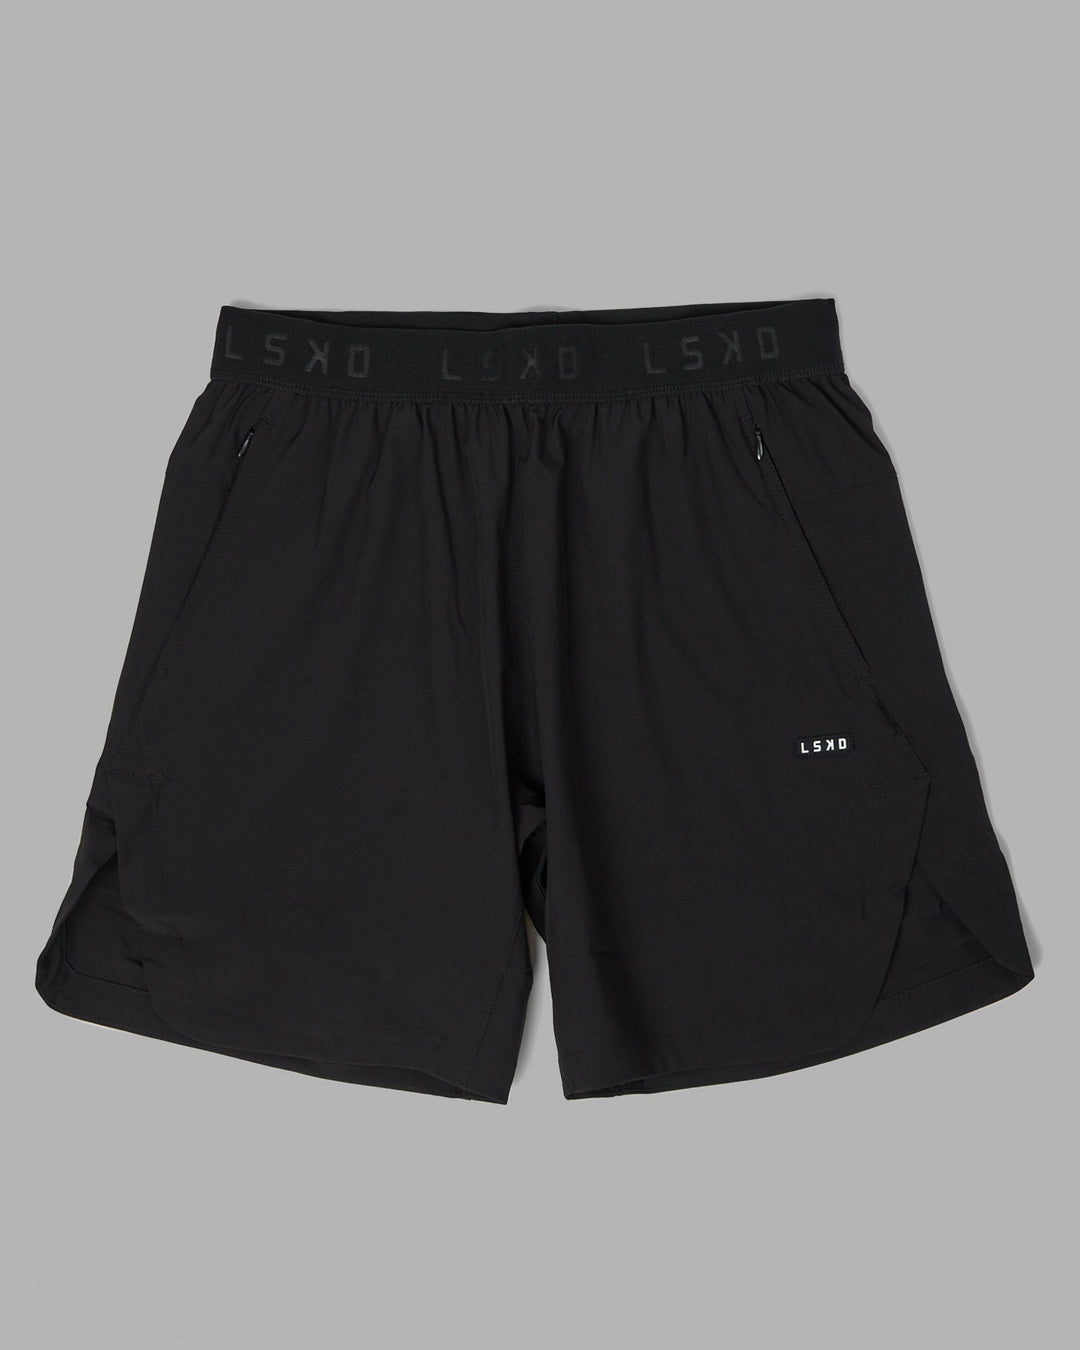 Competition 8" Performance Shorts - Black